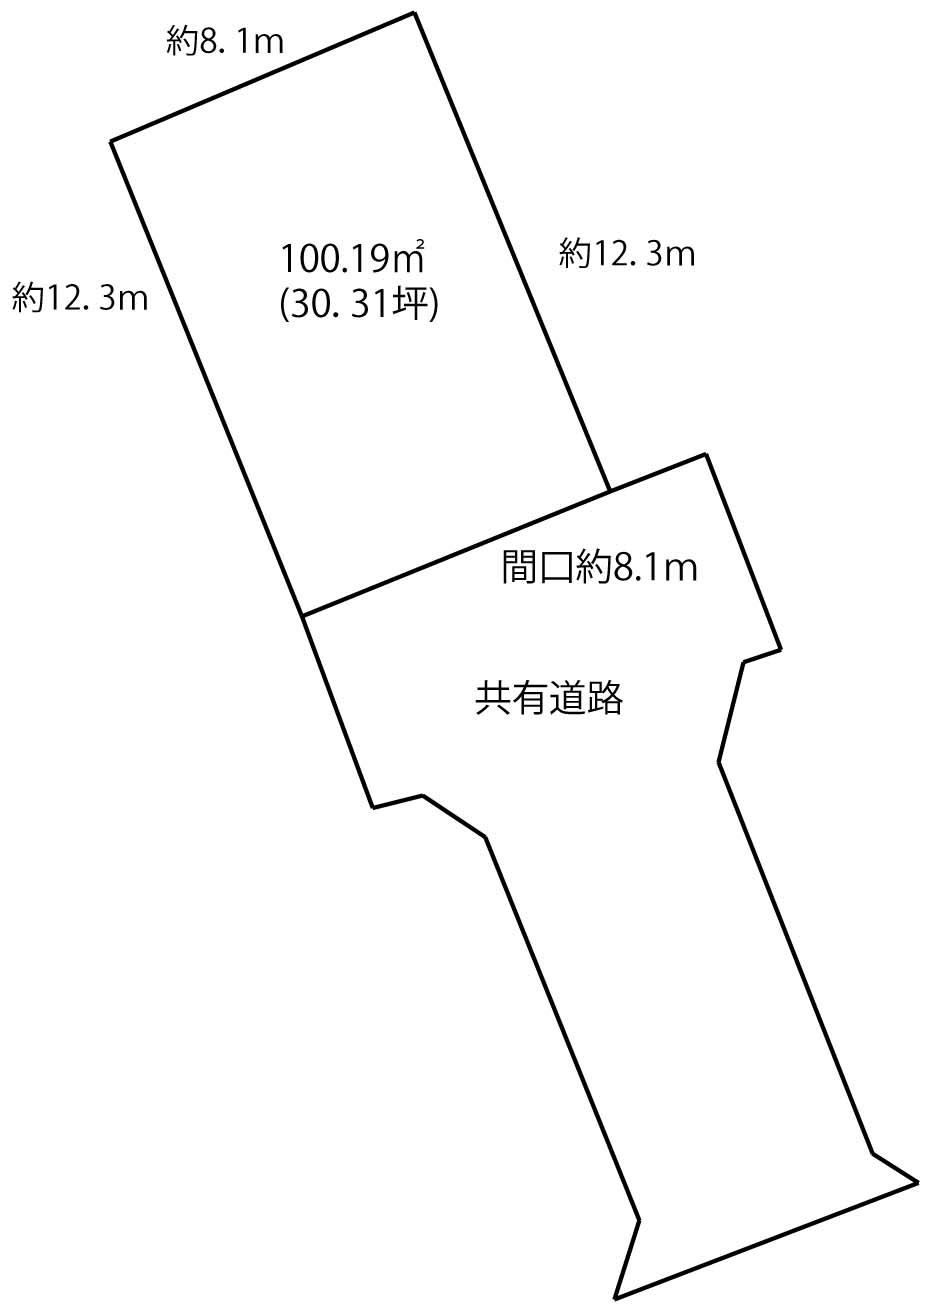 Compartment figure. 49,800,000 yen, 4LDK + S (storeroom), Land area 100.19 sq m , Building area 122.96 sq m southeast shaping land, Share road equity 5 minutes of 1